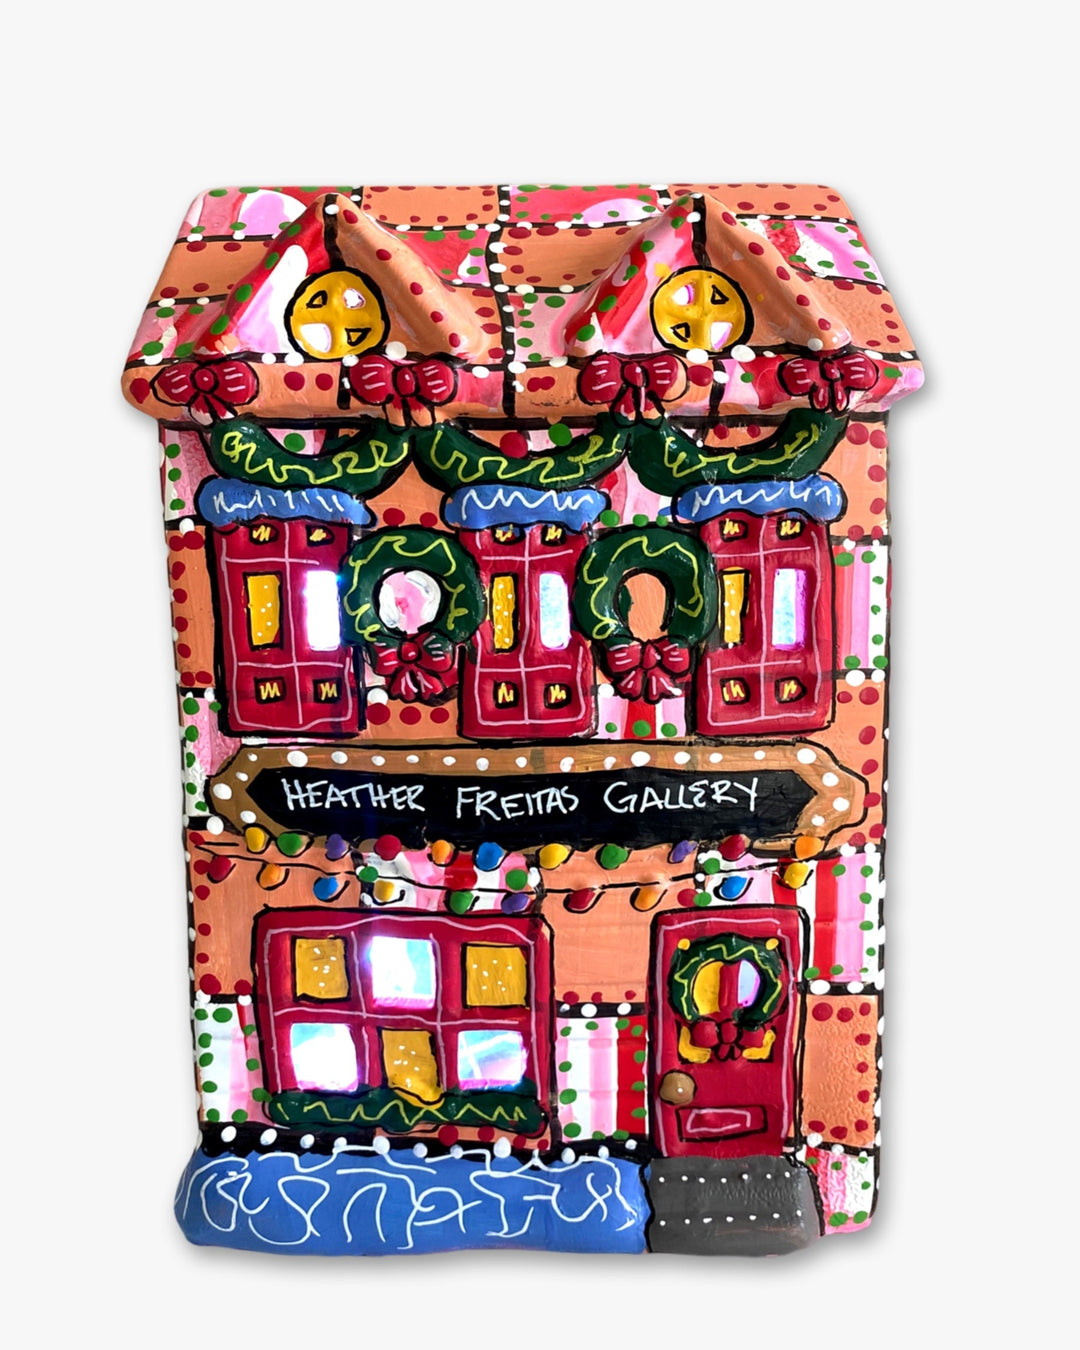 The Gallery Pink & Peach Edition Hand Painted Ceramic LED Christmas Village House - Heather Freitas 